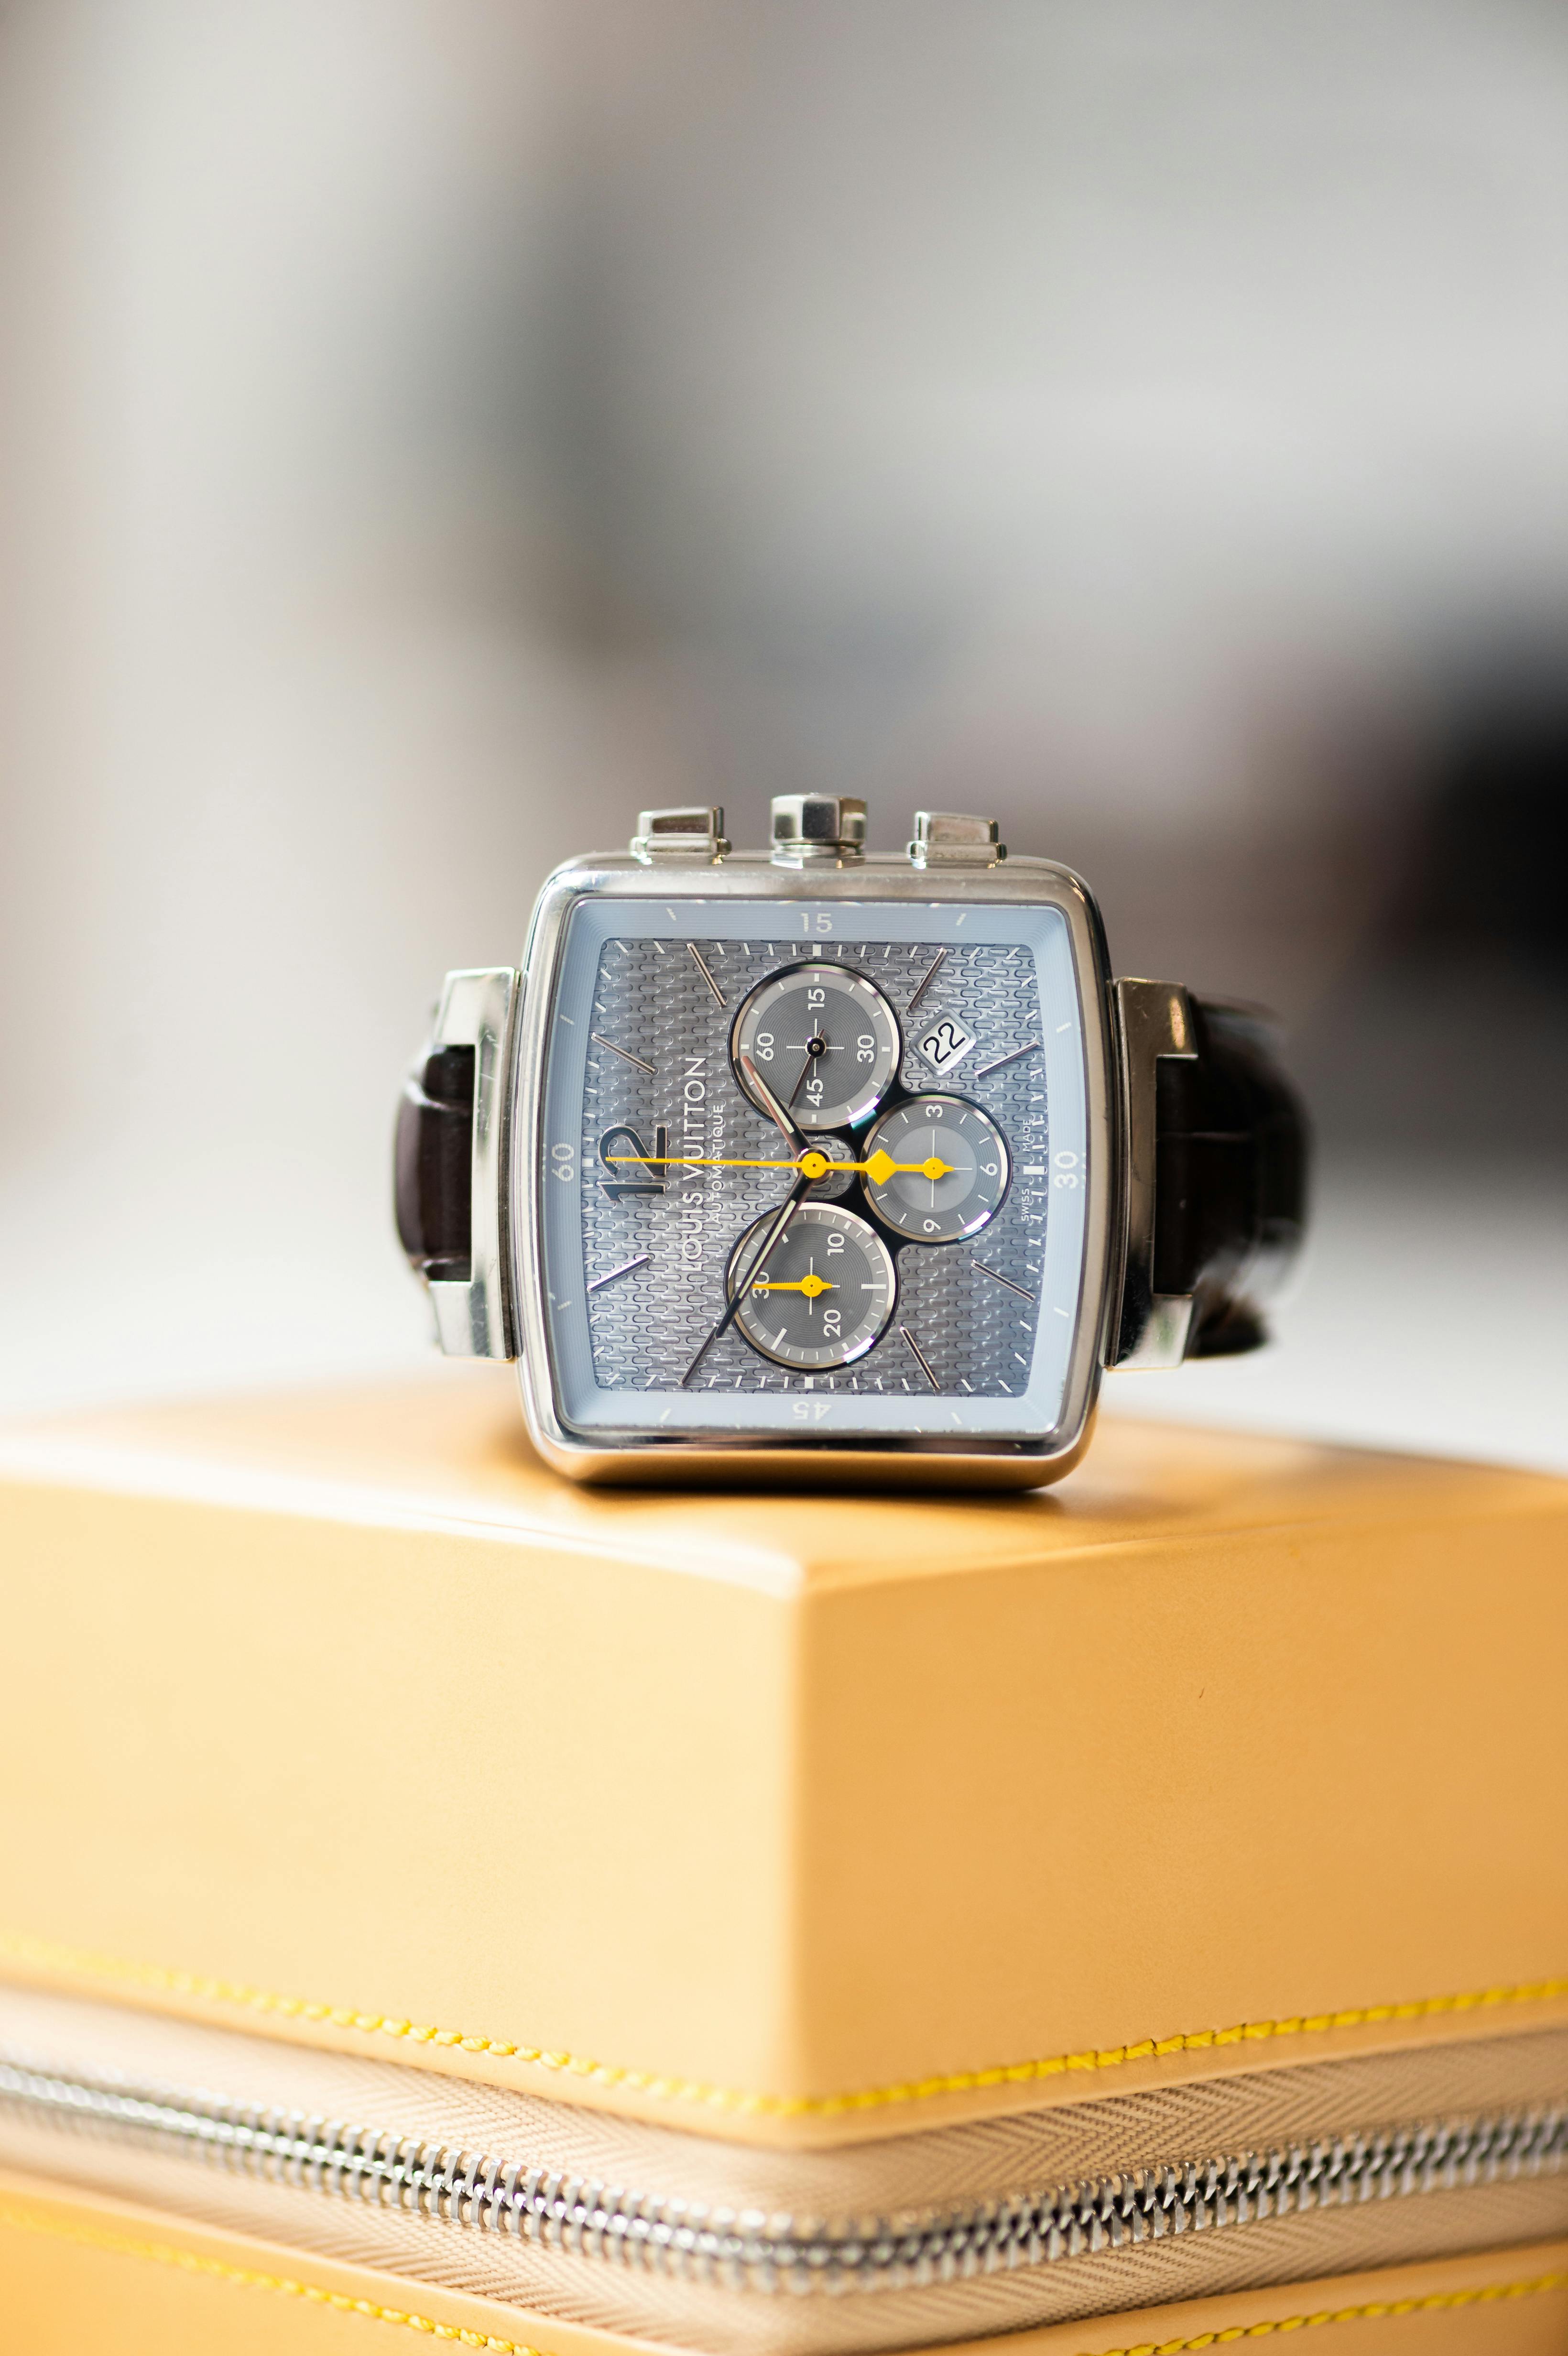 2000'S LOUIS VUITTON SPEEDY CHRONOGRAPH for sale by auction in London,  United Kingdom